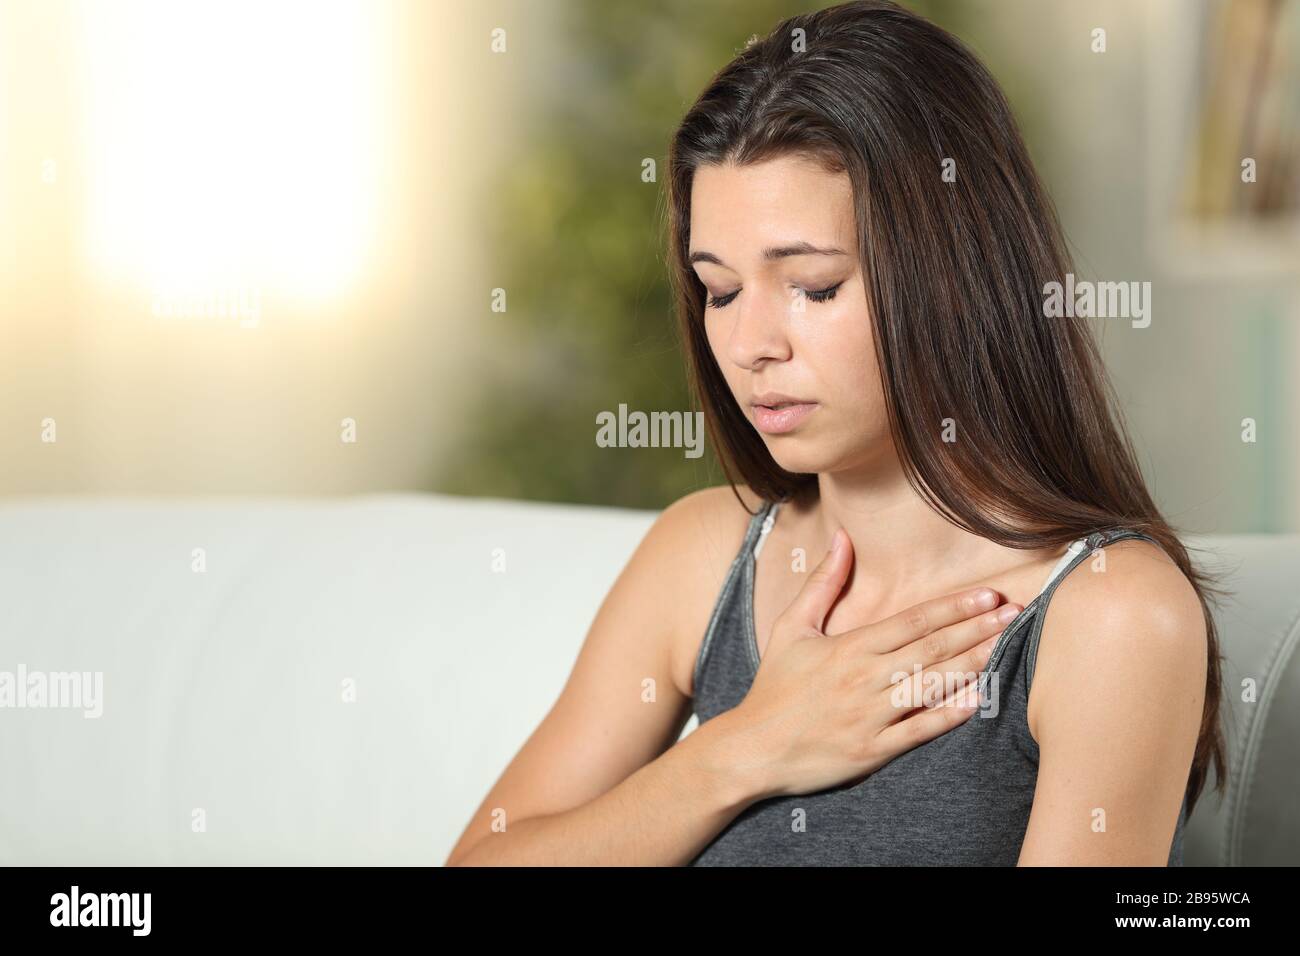 Girl having respiration problems touching chest sitting on a couch in the living room at home Stock Photo